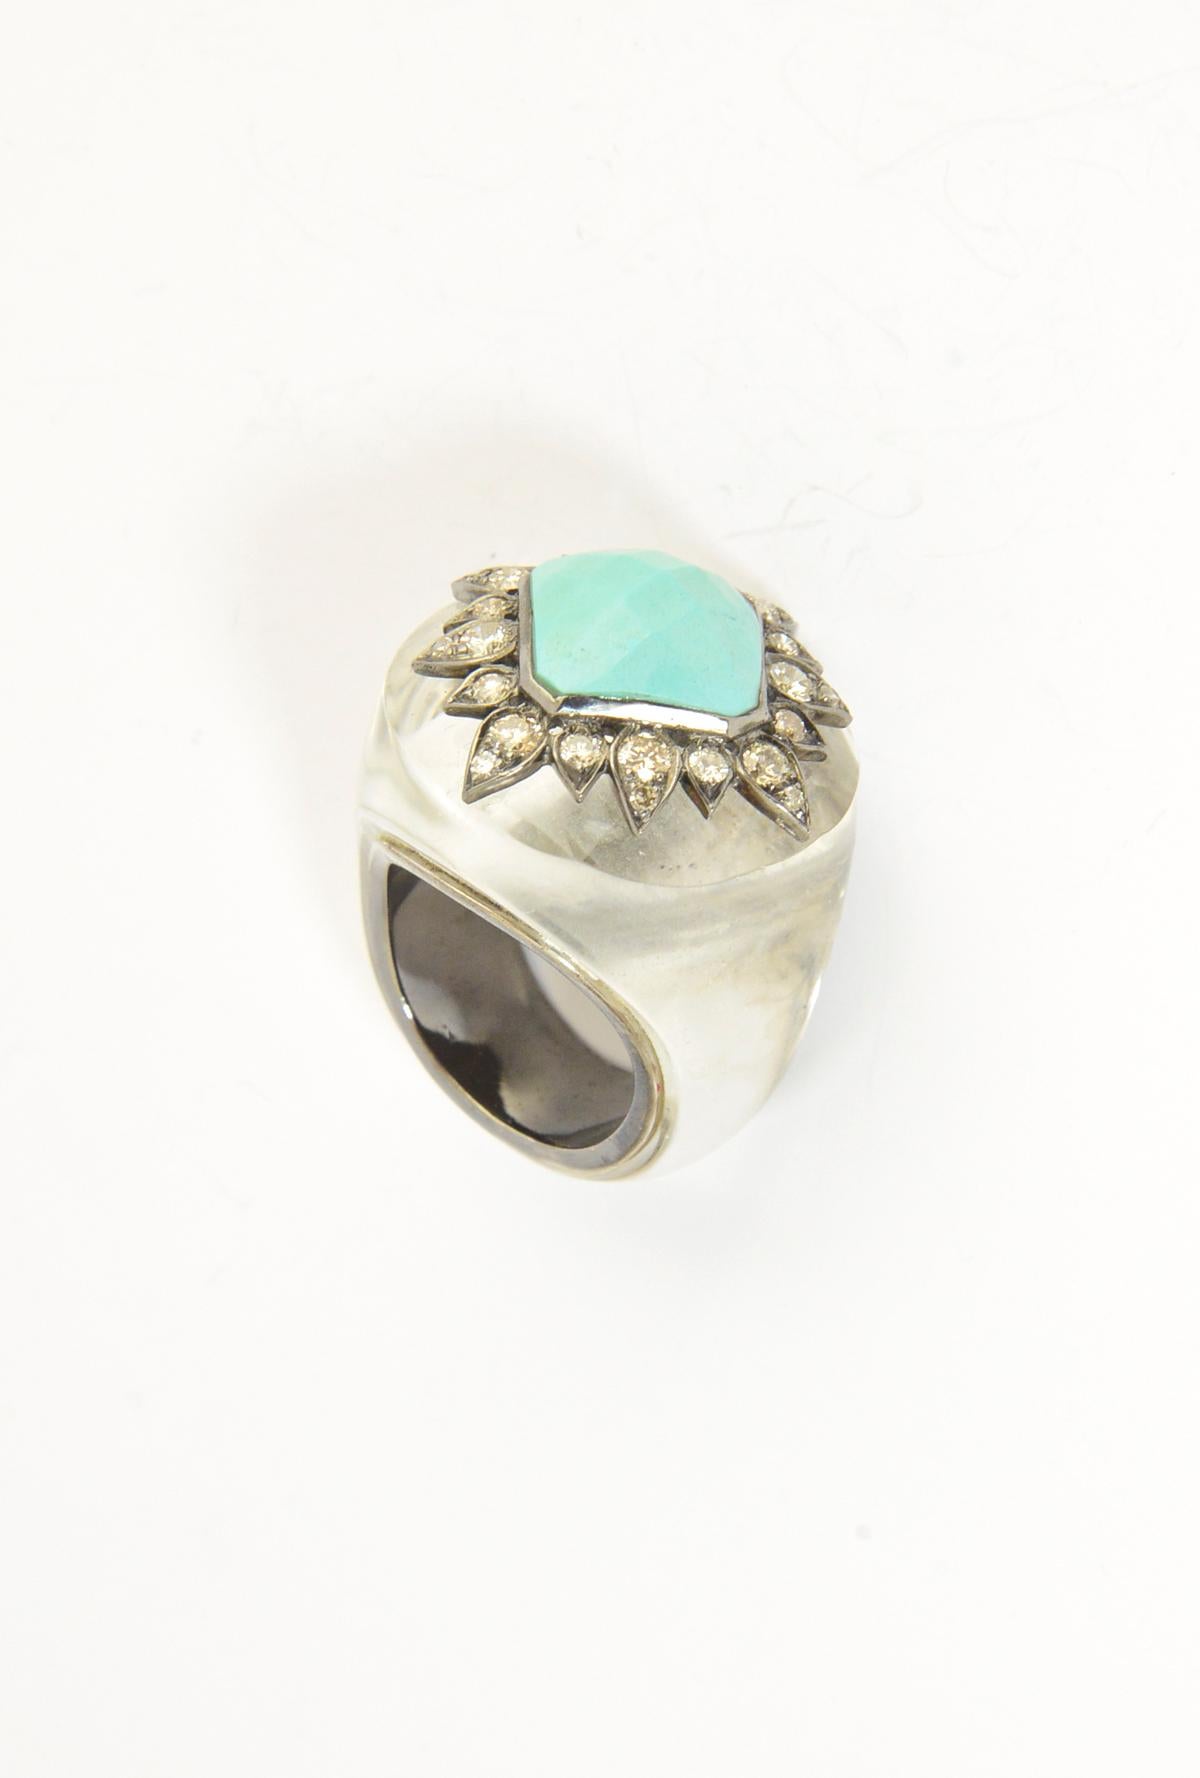 Stunning rock crystal cocktail ring with star design featuring a centrally set faceted piece of reconstituted turquoise in a diamond leaf  frame.  The interior band is sterling silver.

The ring measures 1.02